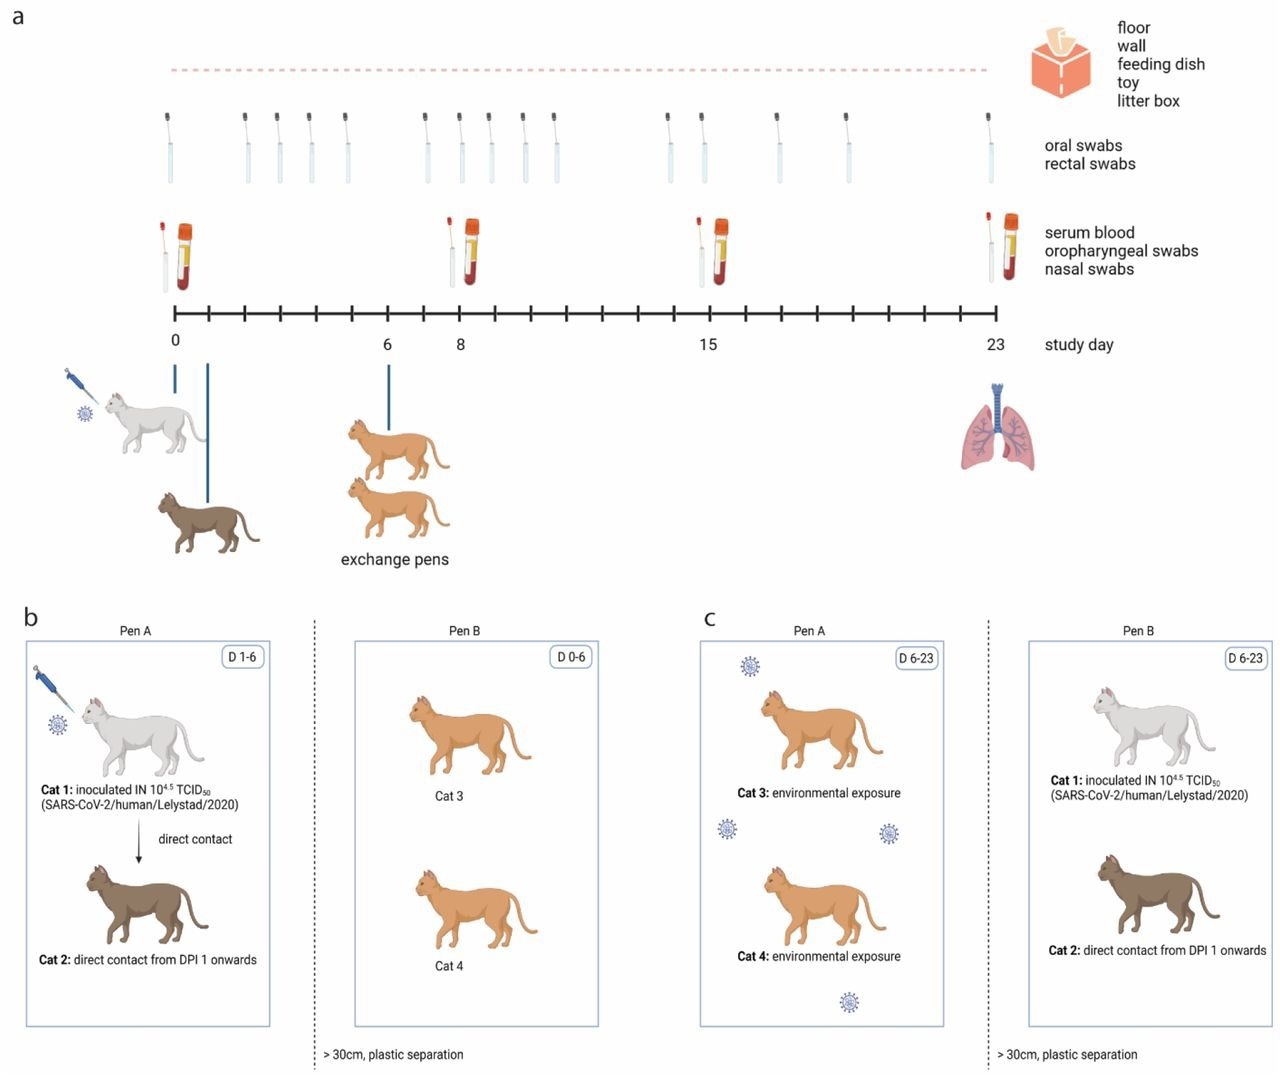 Experimental design of one out of four replicate groups.  (a) Schematic timeline.  One cat was inoculated intranasally on D0, and brought in contact with a naïve cat on D1 in pen A. On D6, these two cats were exchanged with two other naïve cats.  Blood samples, oropharyngeal swabs and nasal swabs were collected under general anaesthesia on D0, D8, D15 and upon euthanasia.  Oral and rectal swabs were collected more frequently without anaesthesia.  Environmental samples were collected daily, and all cats were euthanized on D23 except of one cat who died before the end of the study by a cause not related to SARS-CoV-2.  (b) Until D6, cat 1 (inoculated donor cat) and cat 2 (direct contact recipient cat) were housed in pen A and contaminated the environment.  Cat 3 and cat 4 were housed in pen B, which was separated from pen A by a plastic separator and space.  (c) From D6 onwards, cats 3 and 4 were housed in contaminated pen A. Cats 1 and 2 were housed in pen B.